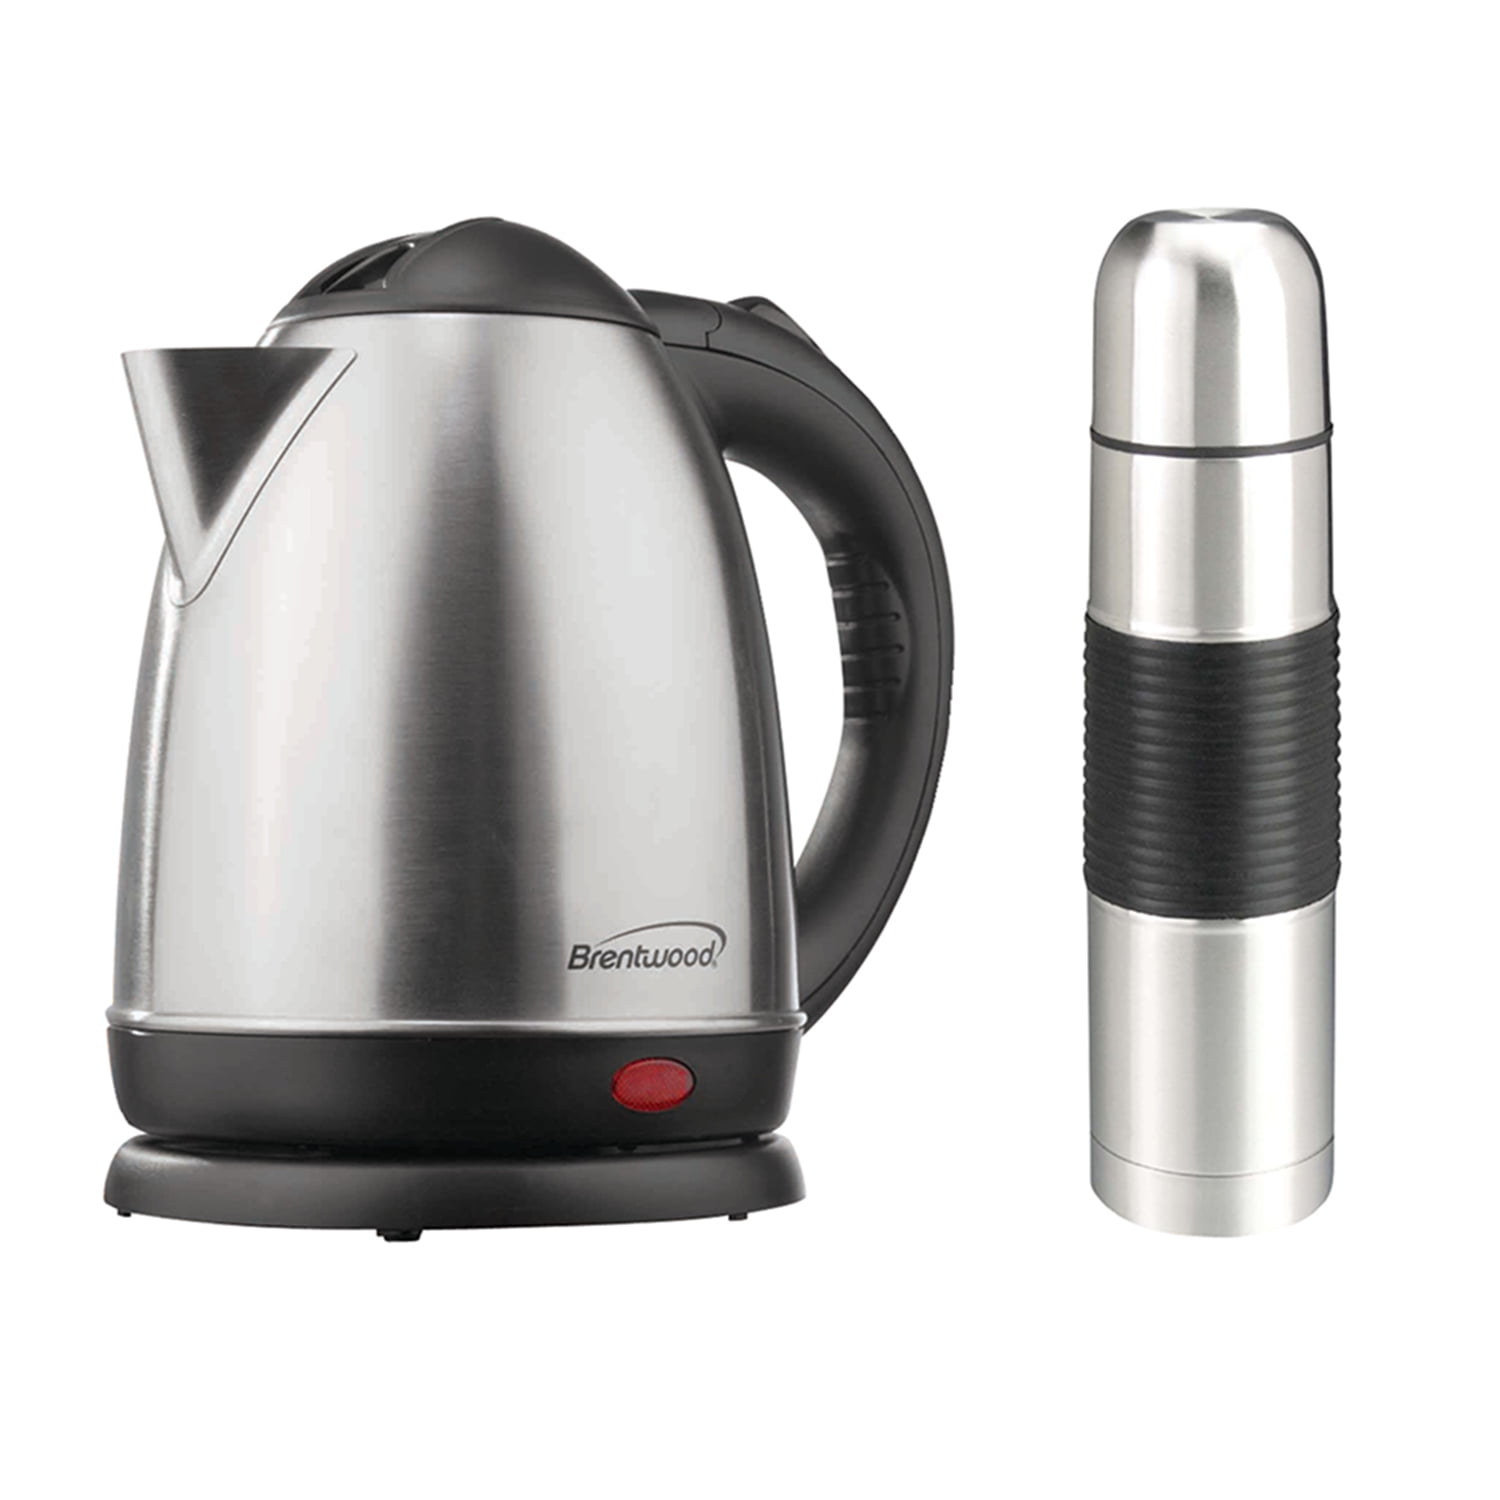 BRAND NEW Brentwood KT-1800 2L Stainless Steel Cordless Electric Kettle 